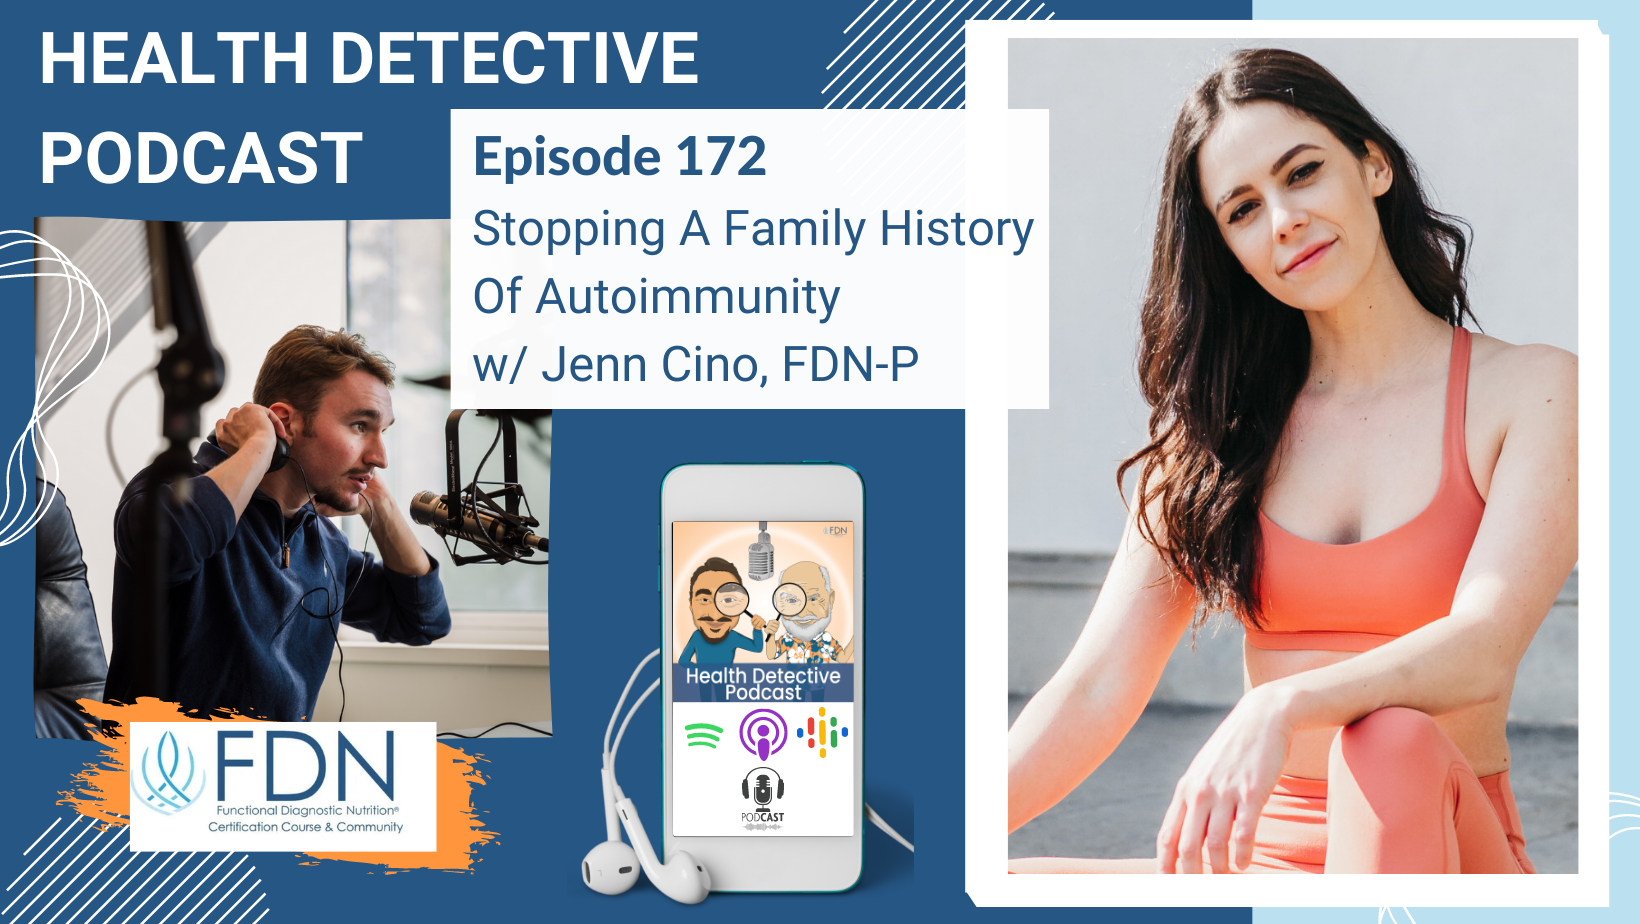 Stopping A Family History of Autoimmunity w/Jenn Cino, FDN-P Stopping a Family History of Autoimmunity